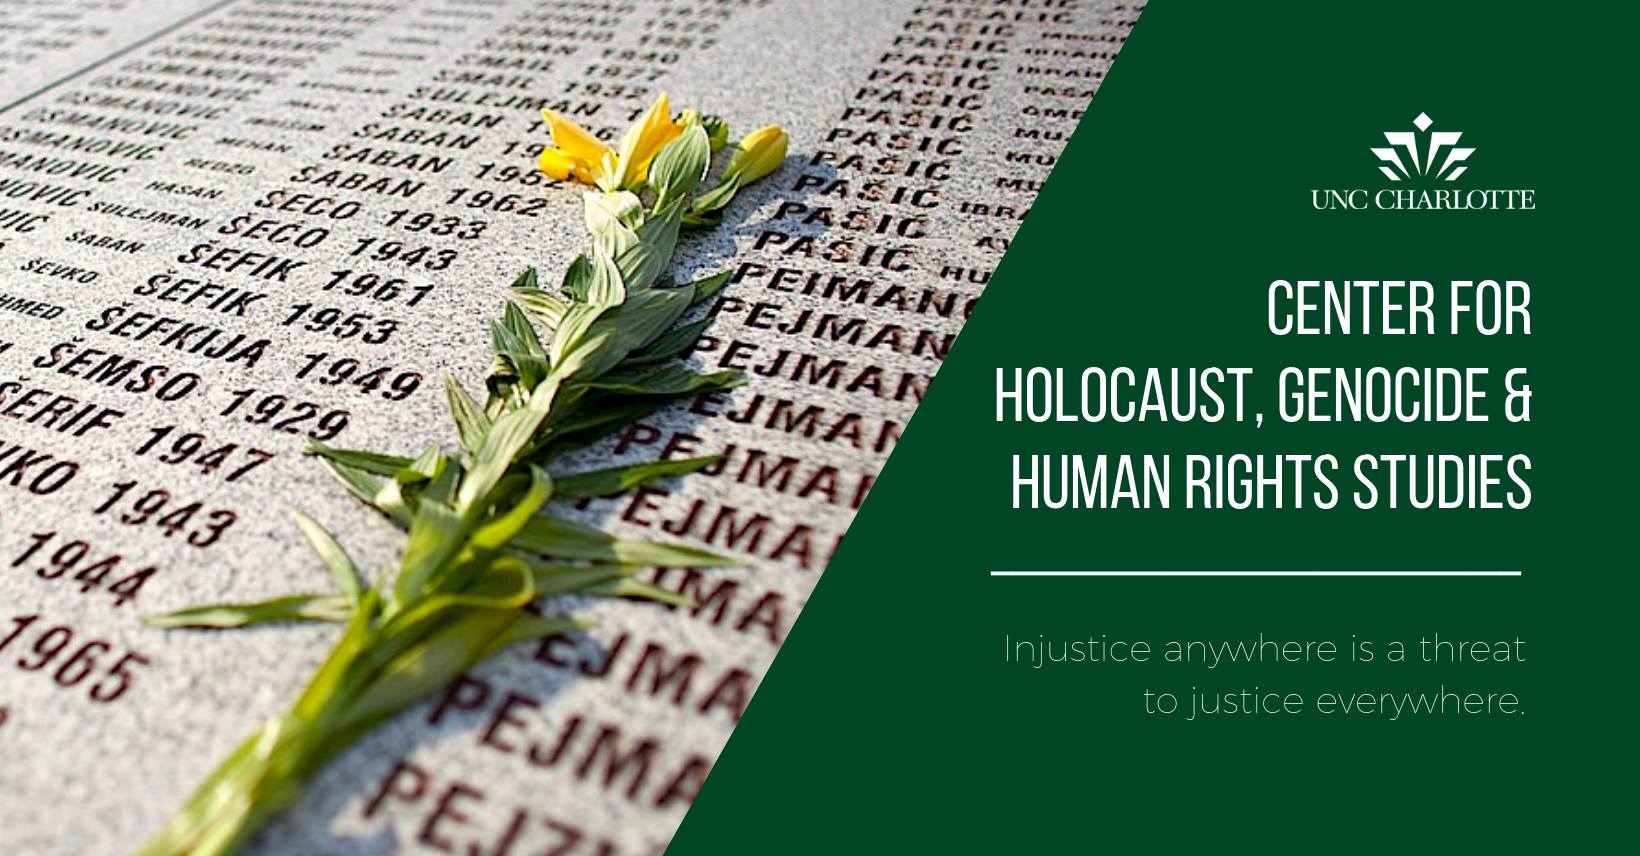 First International Conference of the Center for Holocaust, Genocide & Human Rights Studies